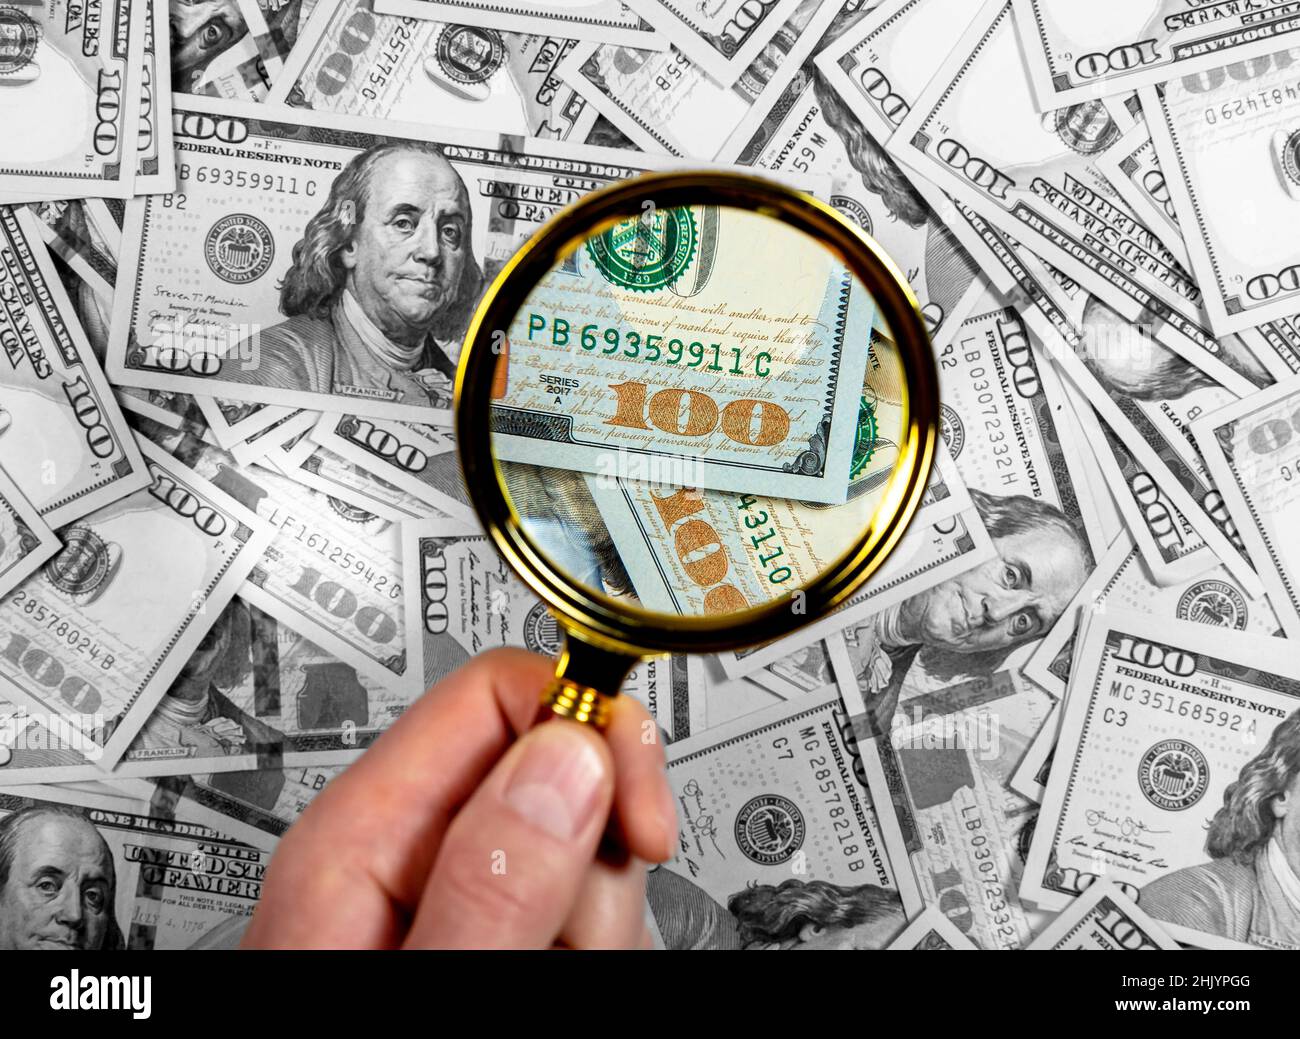 Hundred Dollar Bill And Magnifying Glass Royalty-Free Stock Image